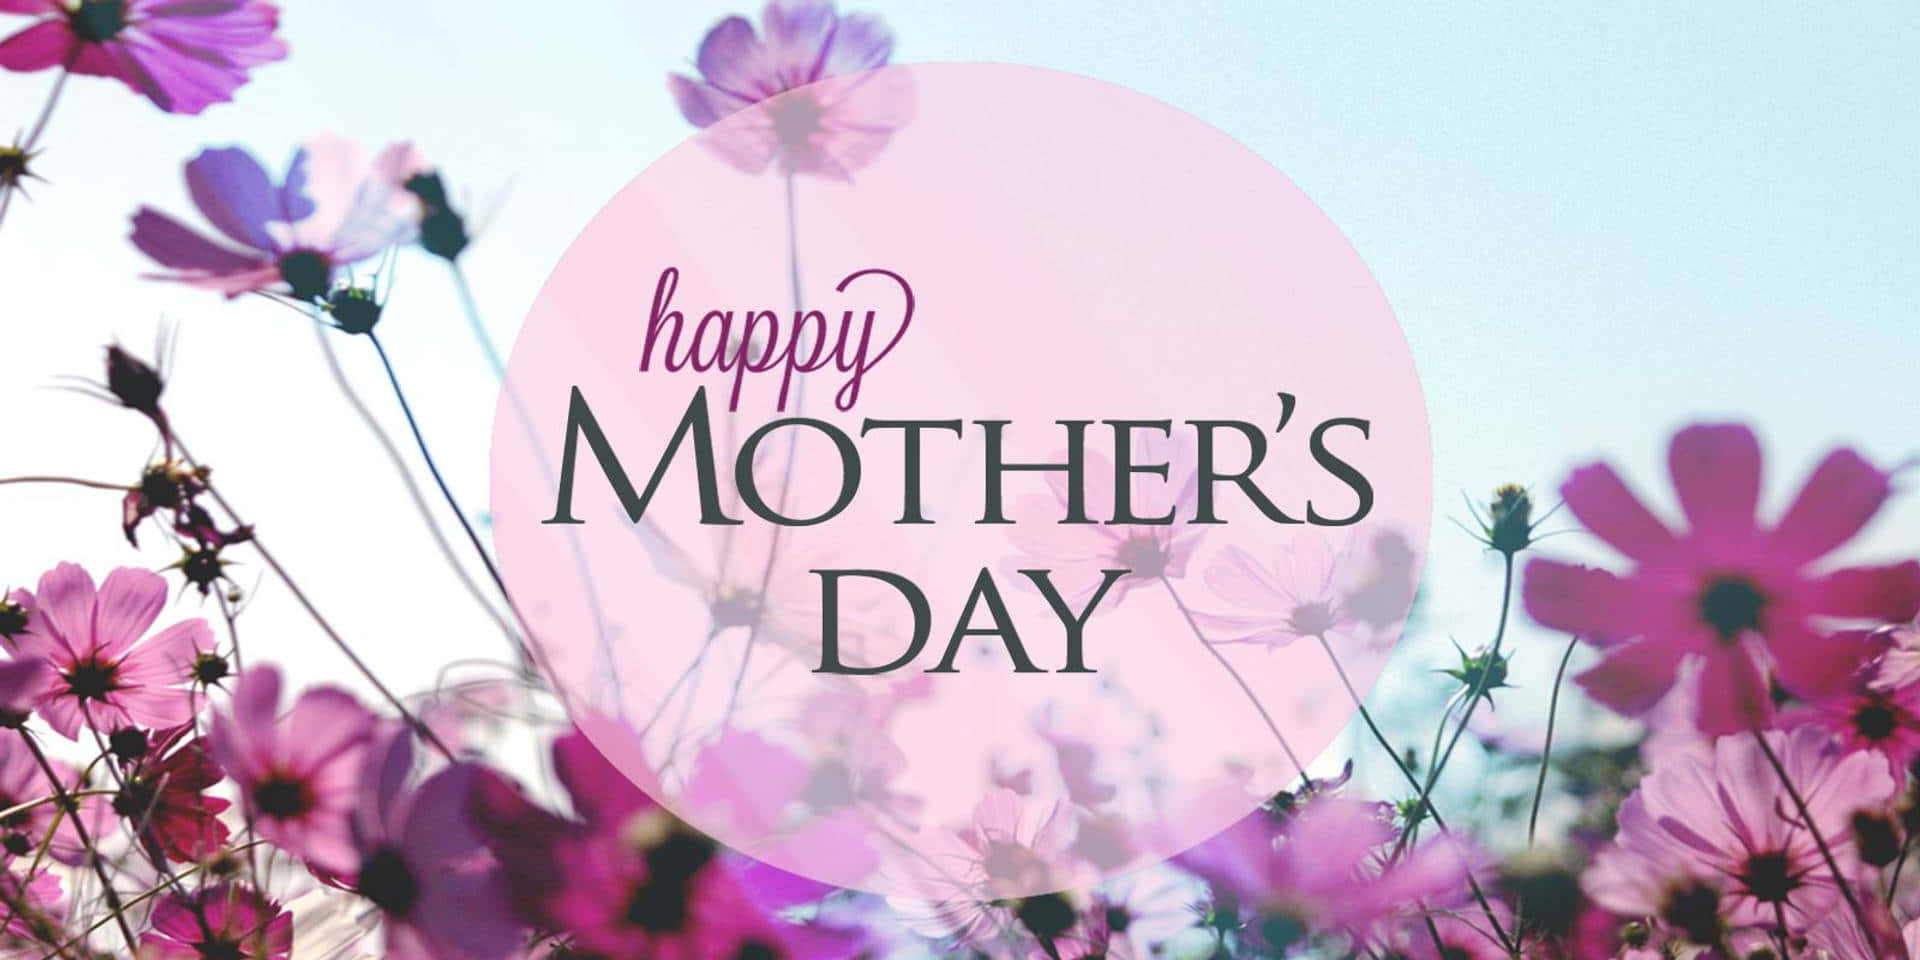 Celebrate Mother's Day with the ones you love! Wallpaper